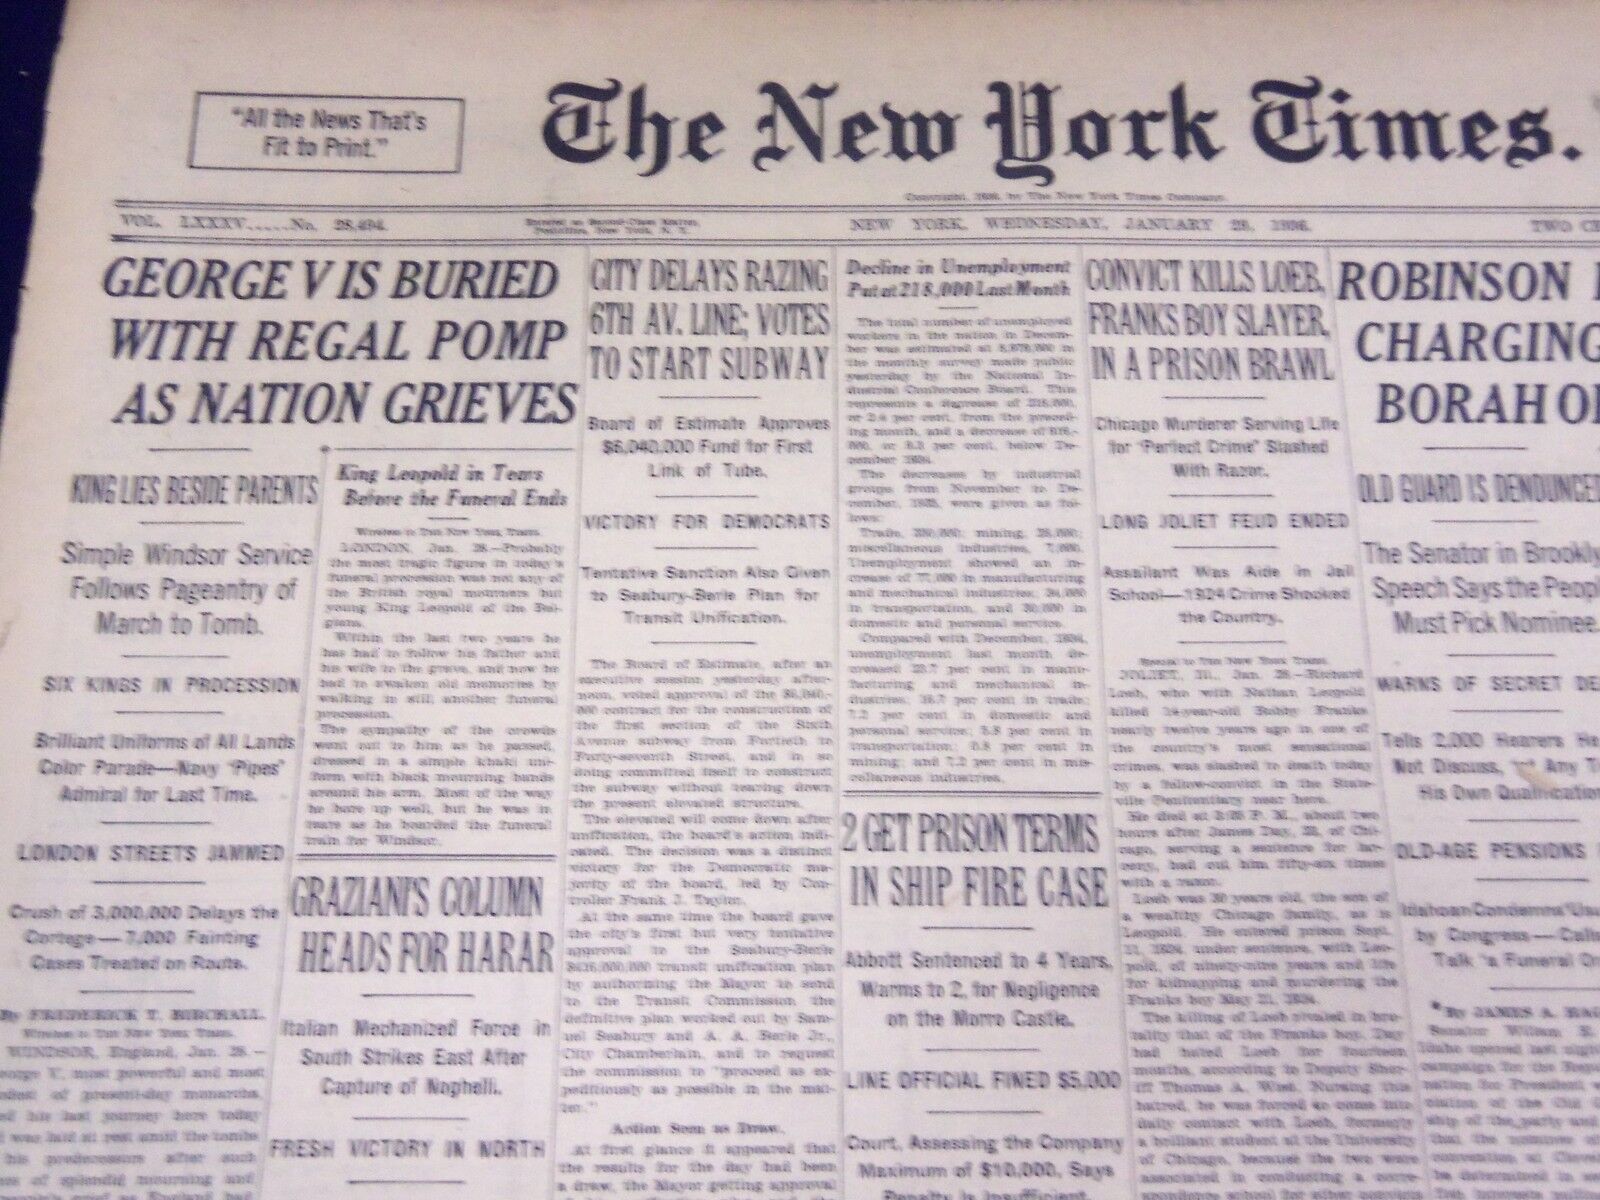 1936 JAN 29 NEW YORK TIMES - GEORGE V, IS BURIED WITH REGAL POMP - NT 1853